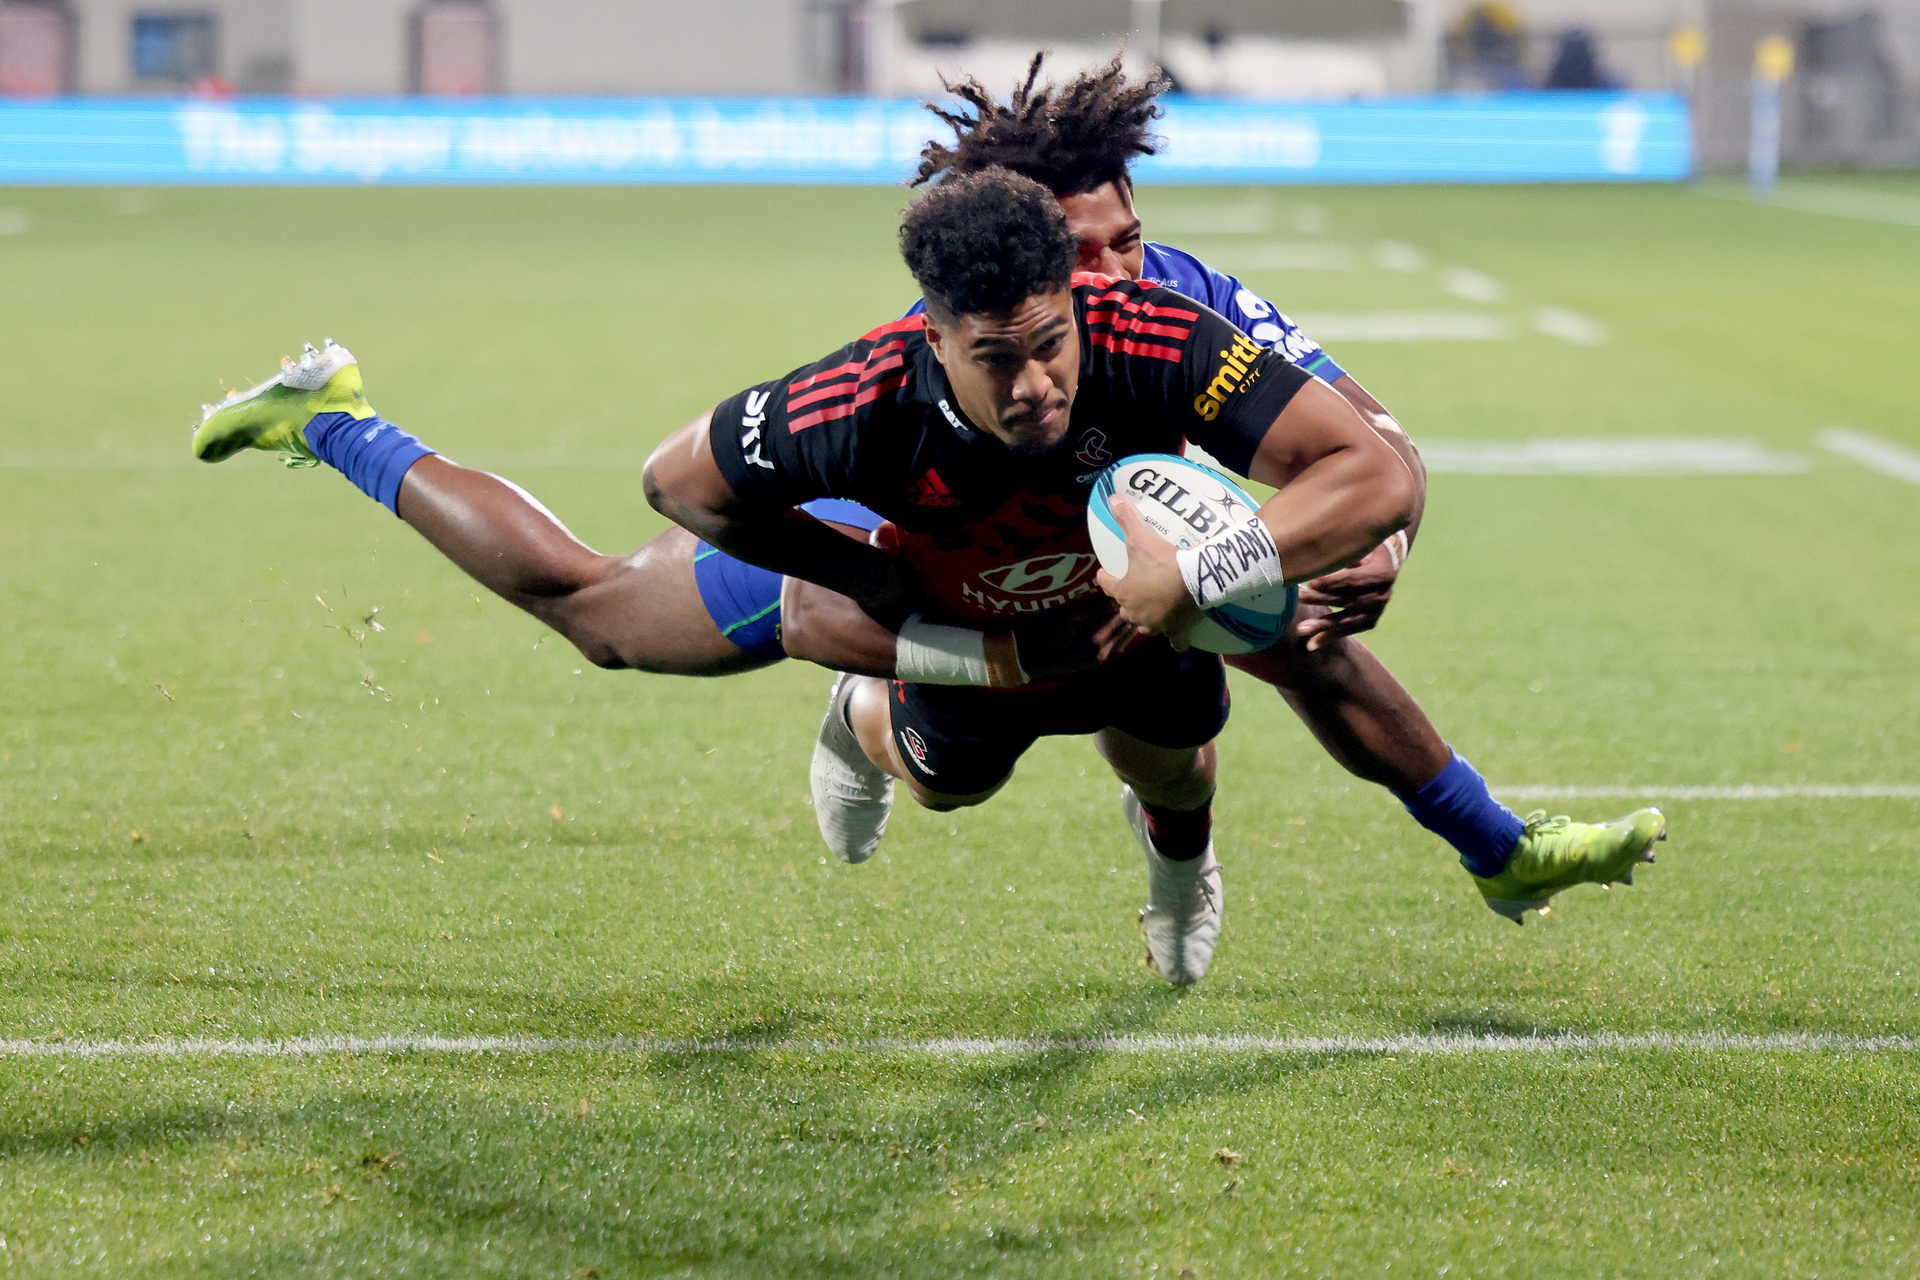 Super Rugby Pacific Clinical Crusaders destroy Fijian Drua